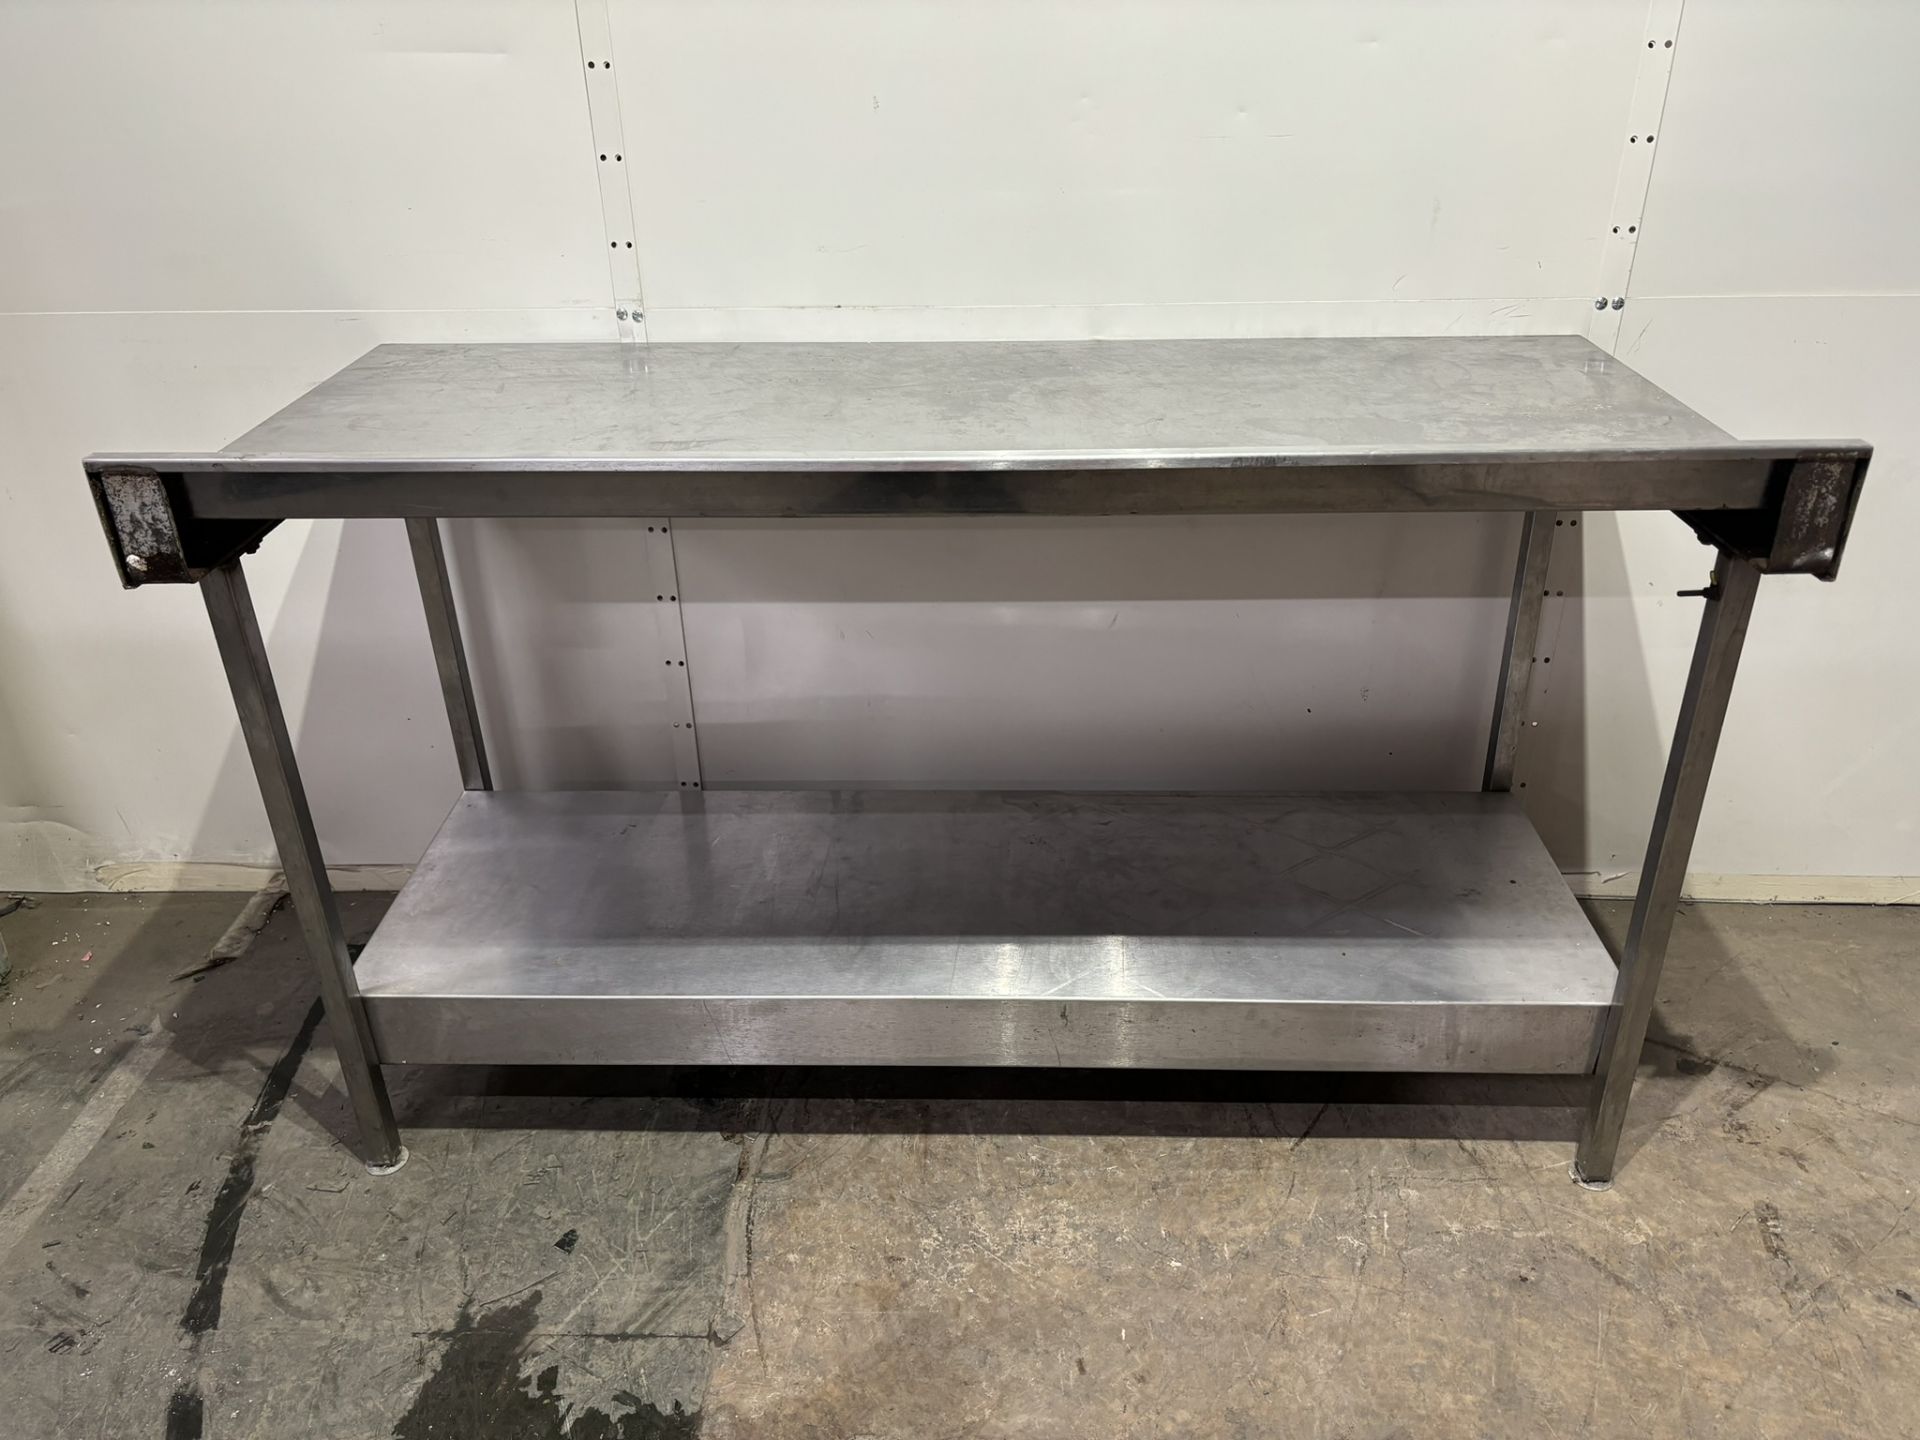 1500mm Stainless steel Commercial Catering Table With Bottom Shelf - Image 5 of 5